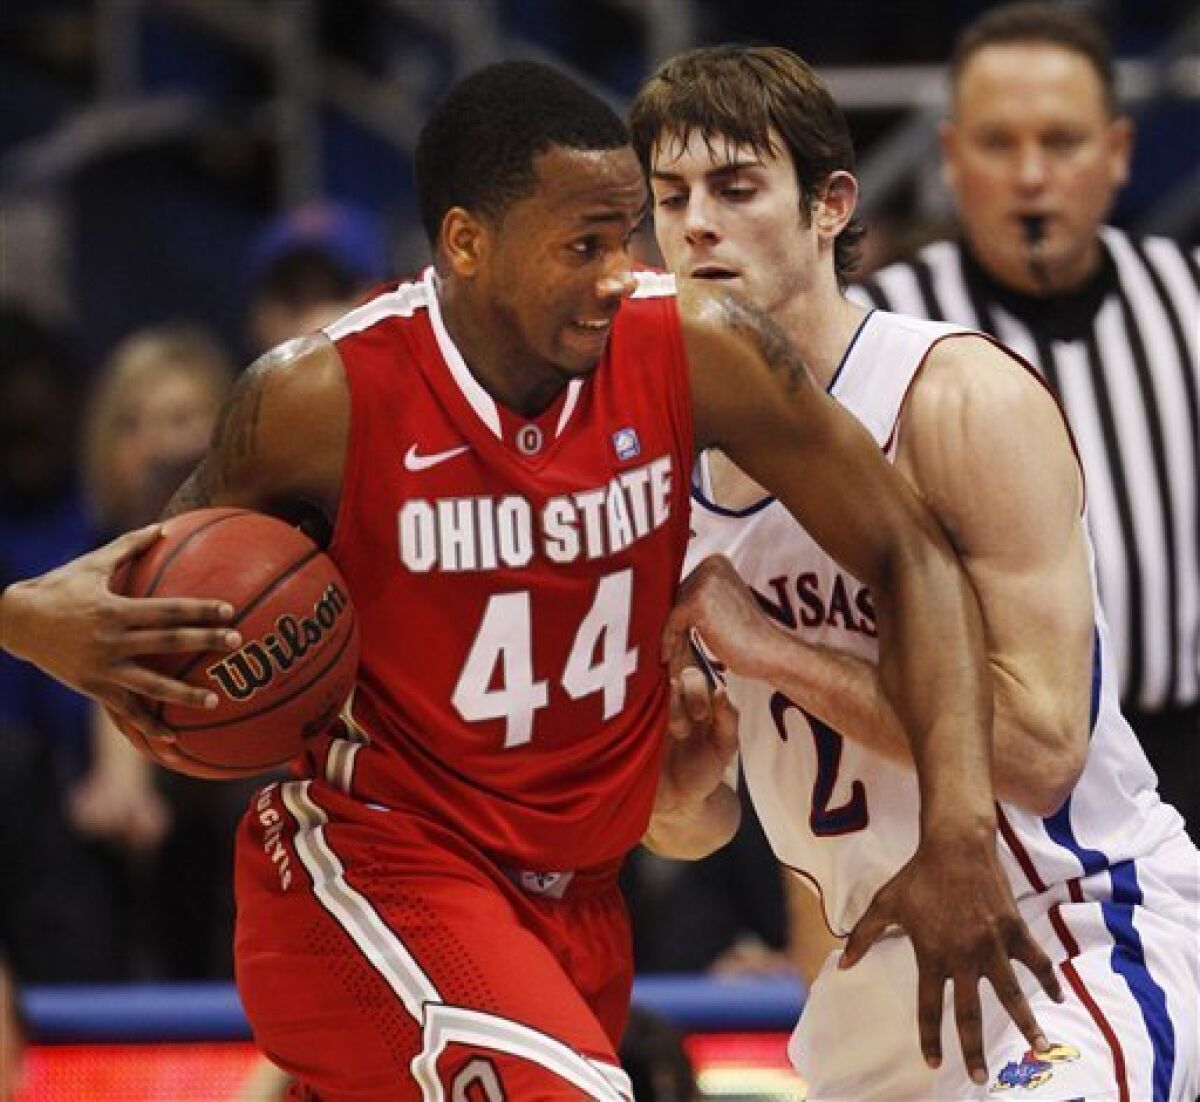 Ohio State guard William Buford (44) is covered by Kansas guard Conner Teahan (2) during the first half of an NCAA college basketball game in Lawrence, Kan., Saturday, Dec. 10, 2011. (AP Photo/Orlin Wagner)